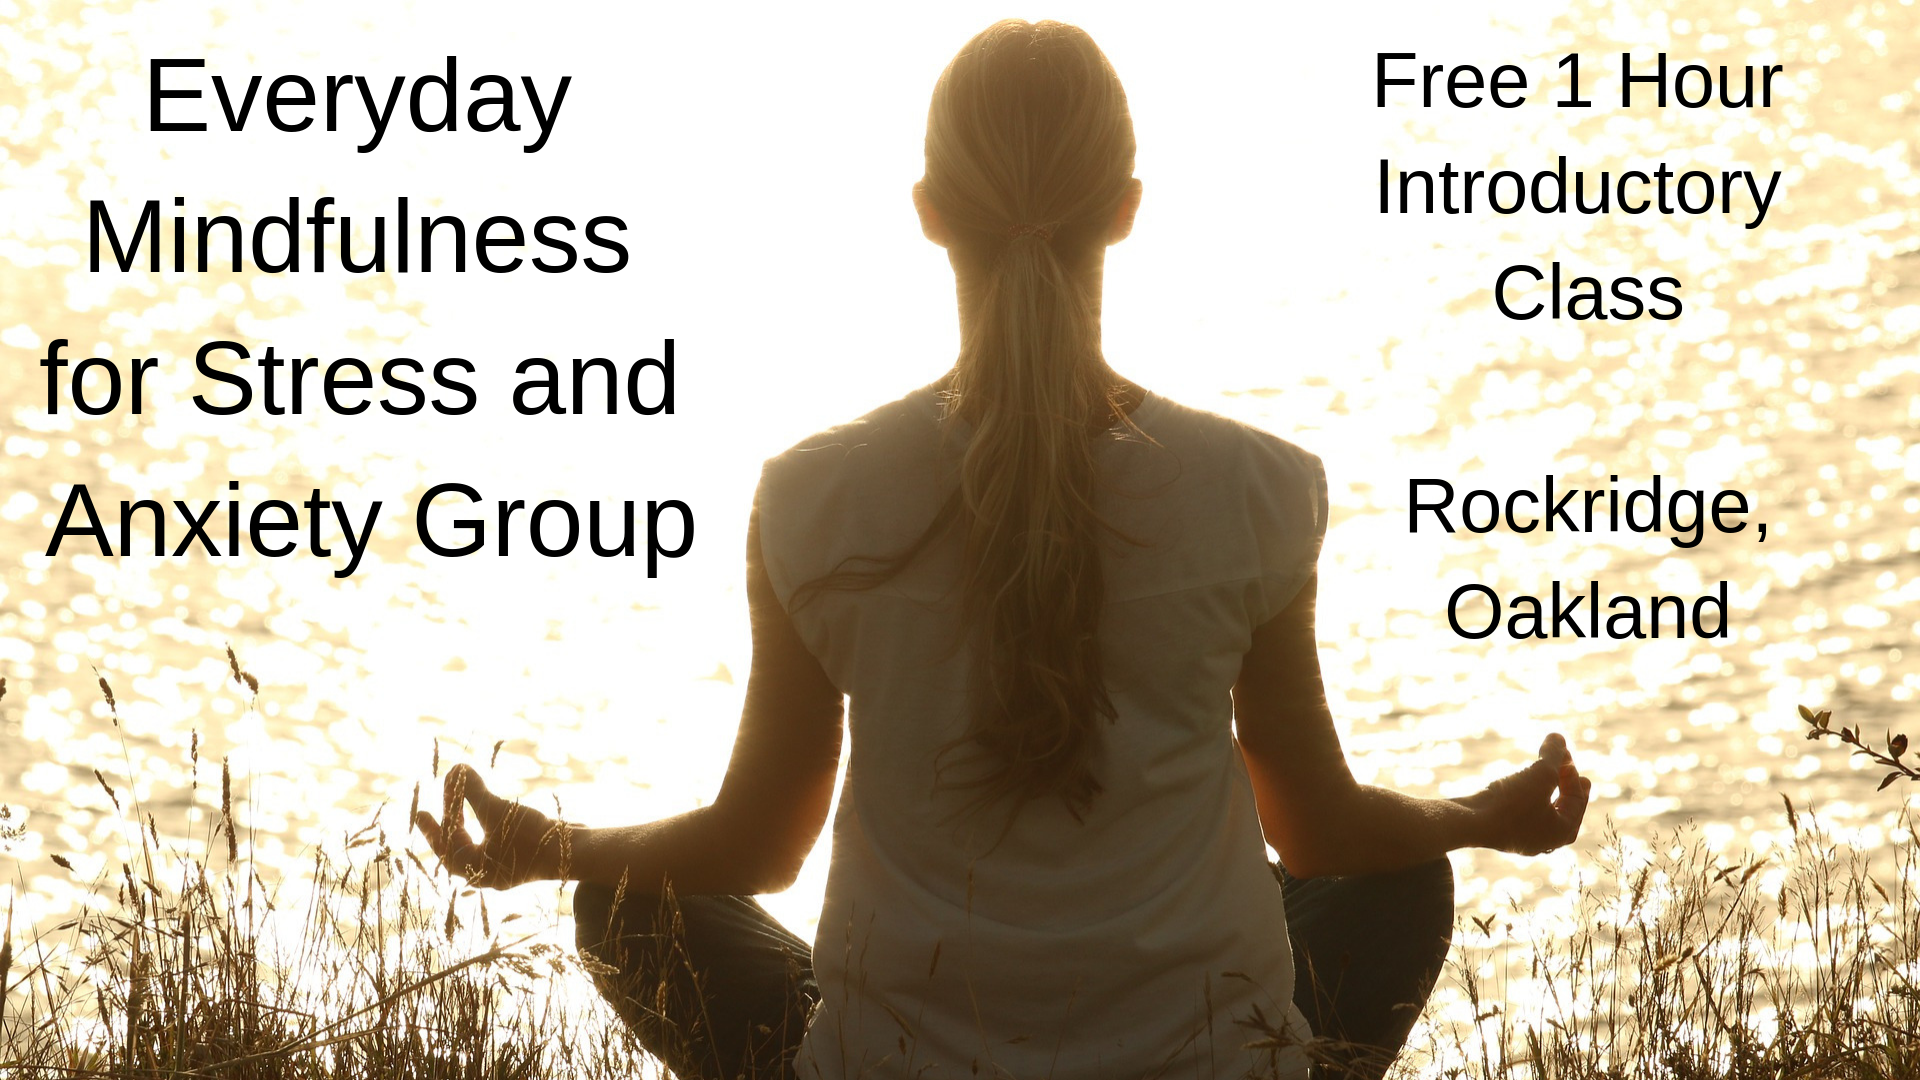 Free Introductory Class - Everyday Mindfulness for Stress and Anxiety